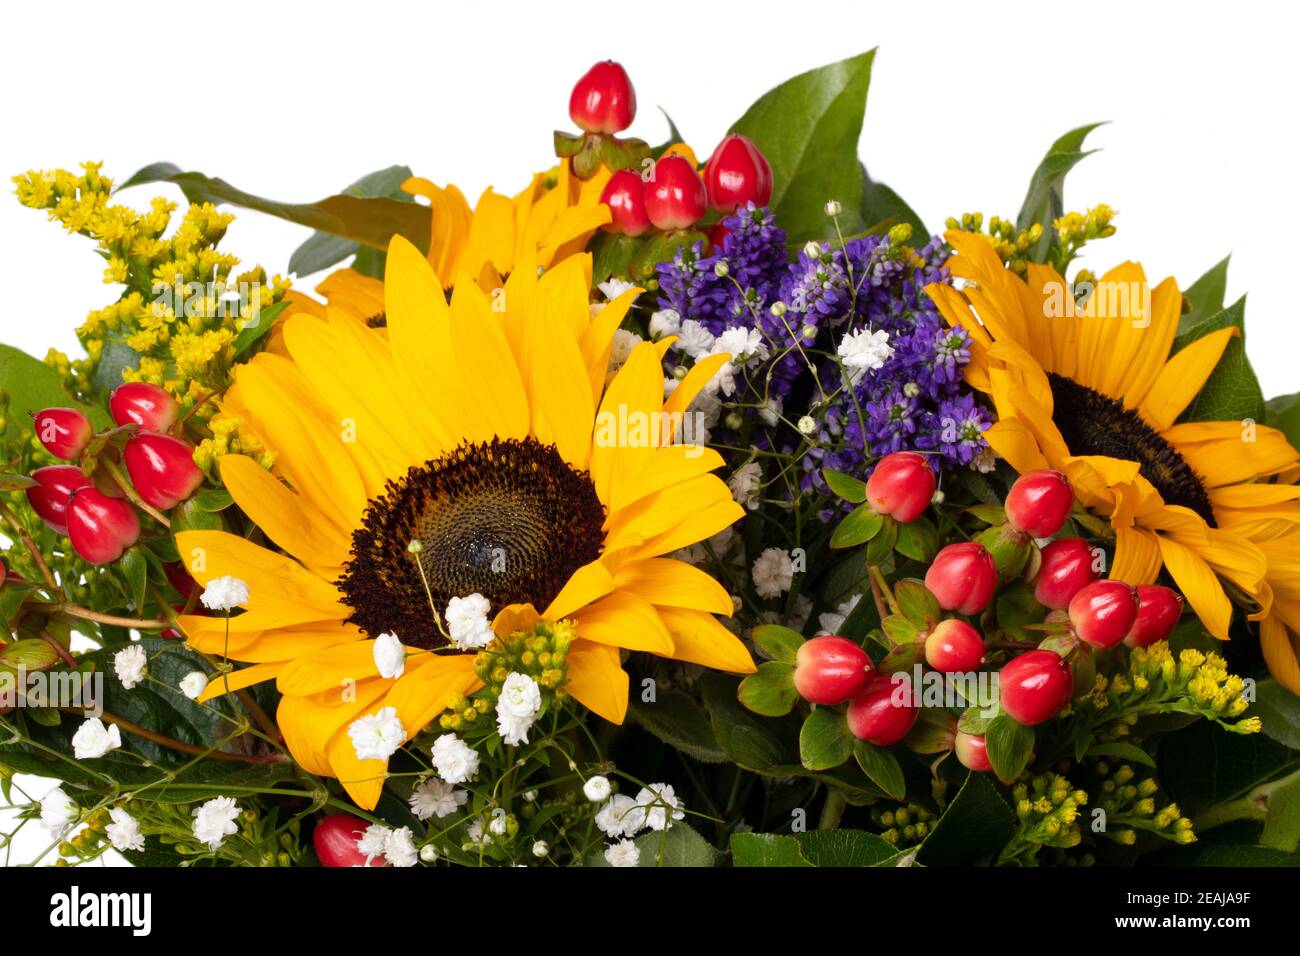 Flower bouquet isolated. Bouquet of beautiful fresh sunflowers top view isolated on a white background. Flower decorations design element. Birthday, Mother day and other festivals. Stock Photo